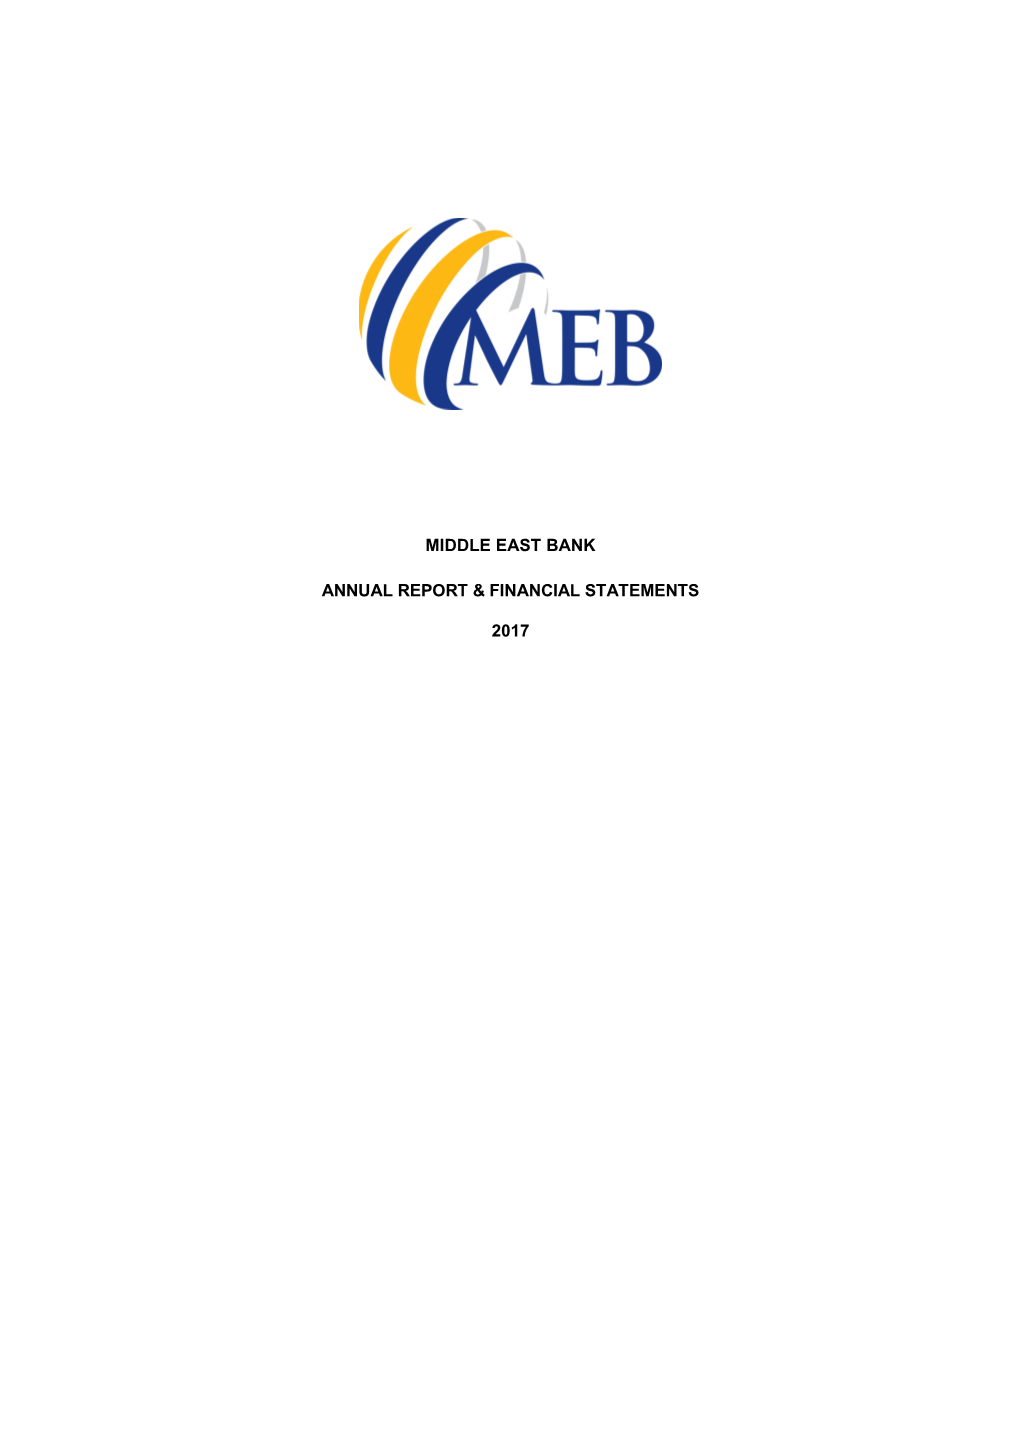 Middle East Bank Annual Report & Financial Statements 2017